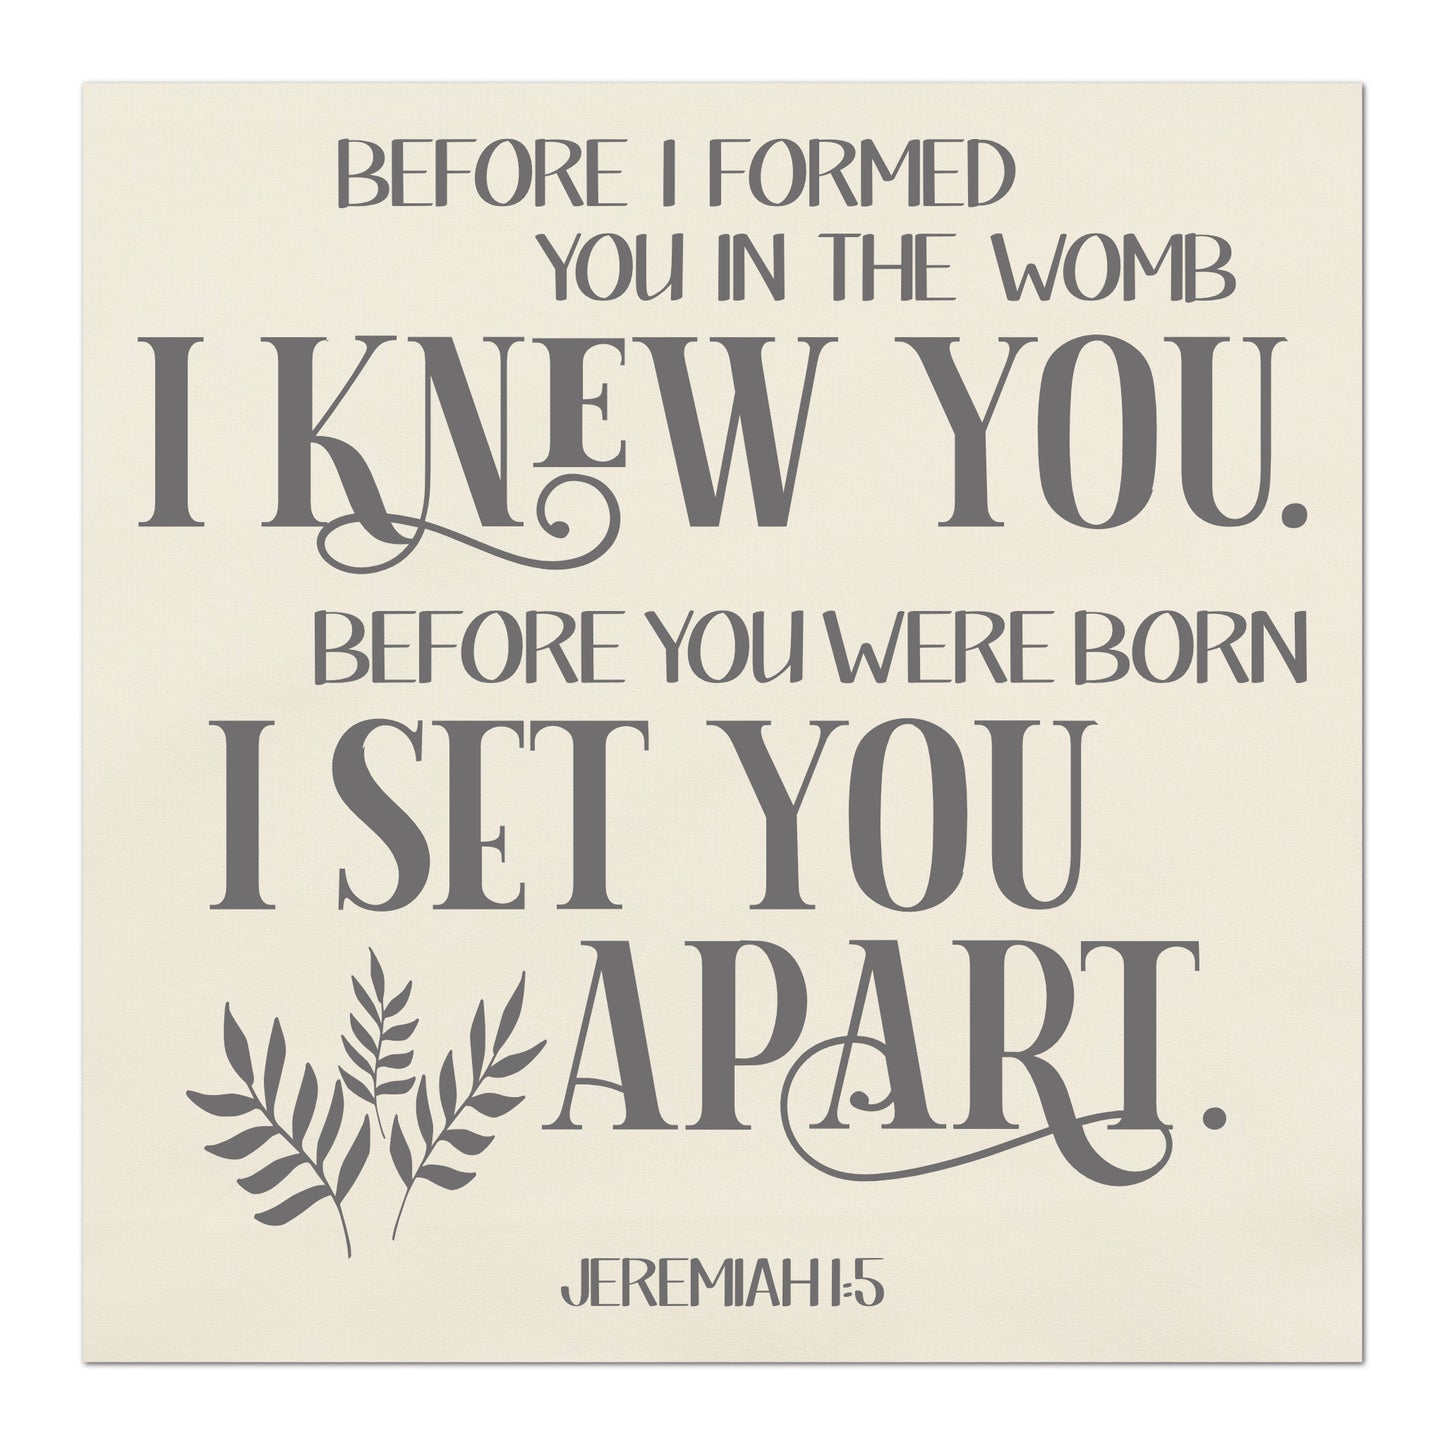 Before I formed you in the womb I knew you.  Before you were born I set you apart. - Jeremiah1:5, Quilt Block, Fabric Panel Print